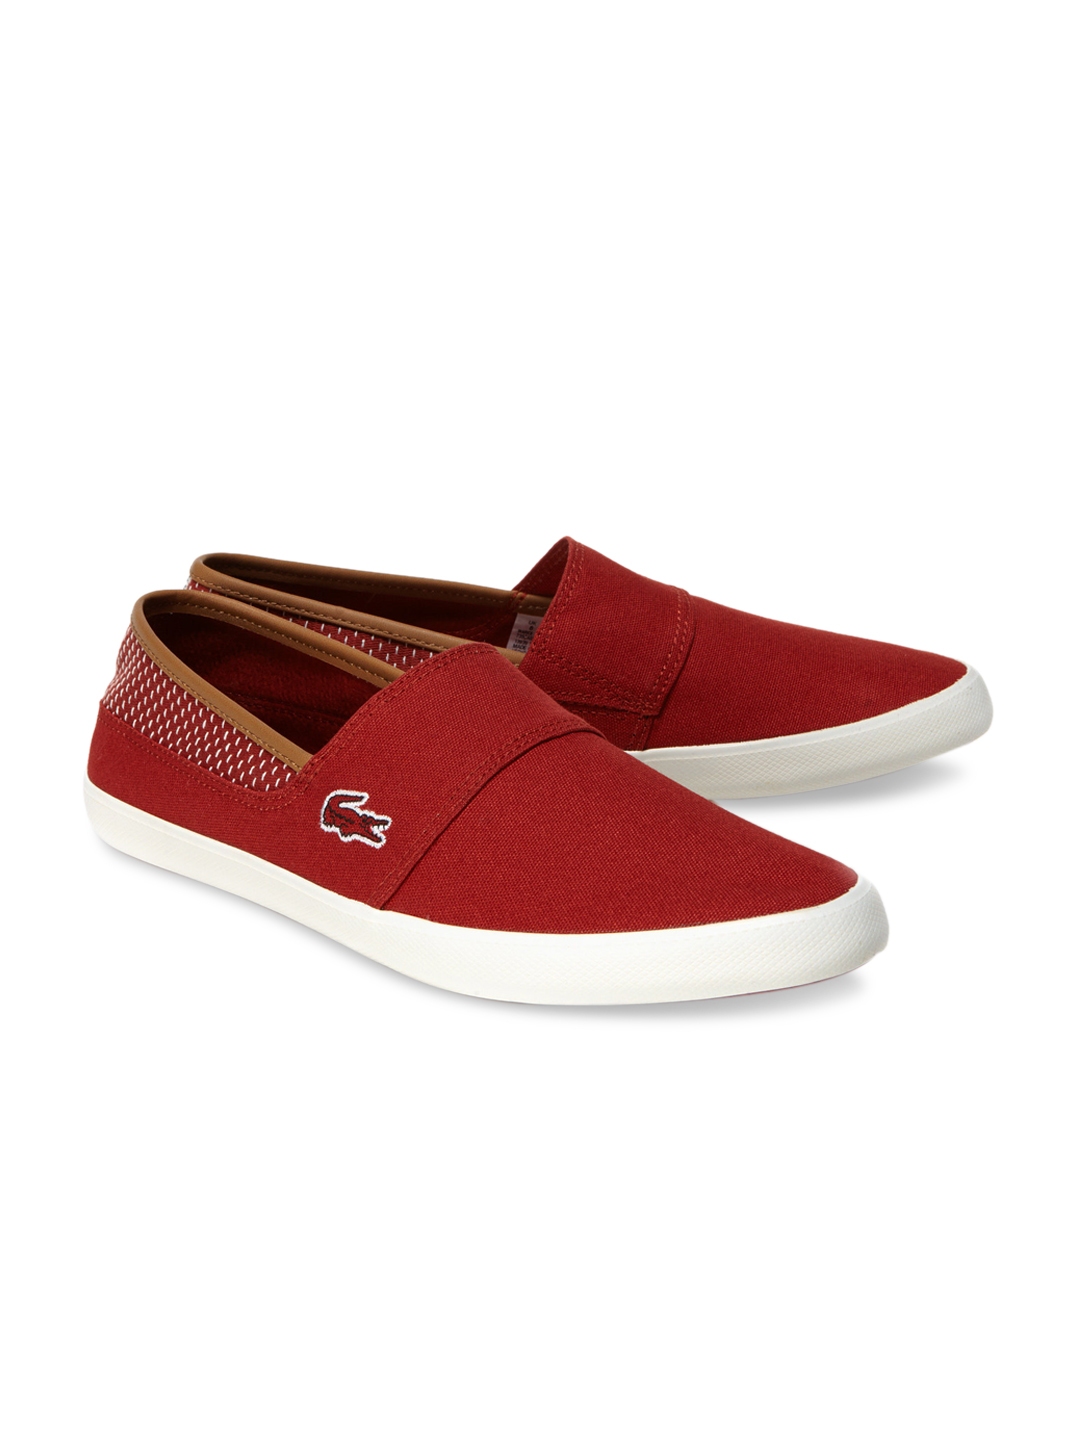 Buy Lacoste Men Red Loafers - Casual Shoes for Men 4712665 | Myntra